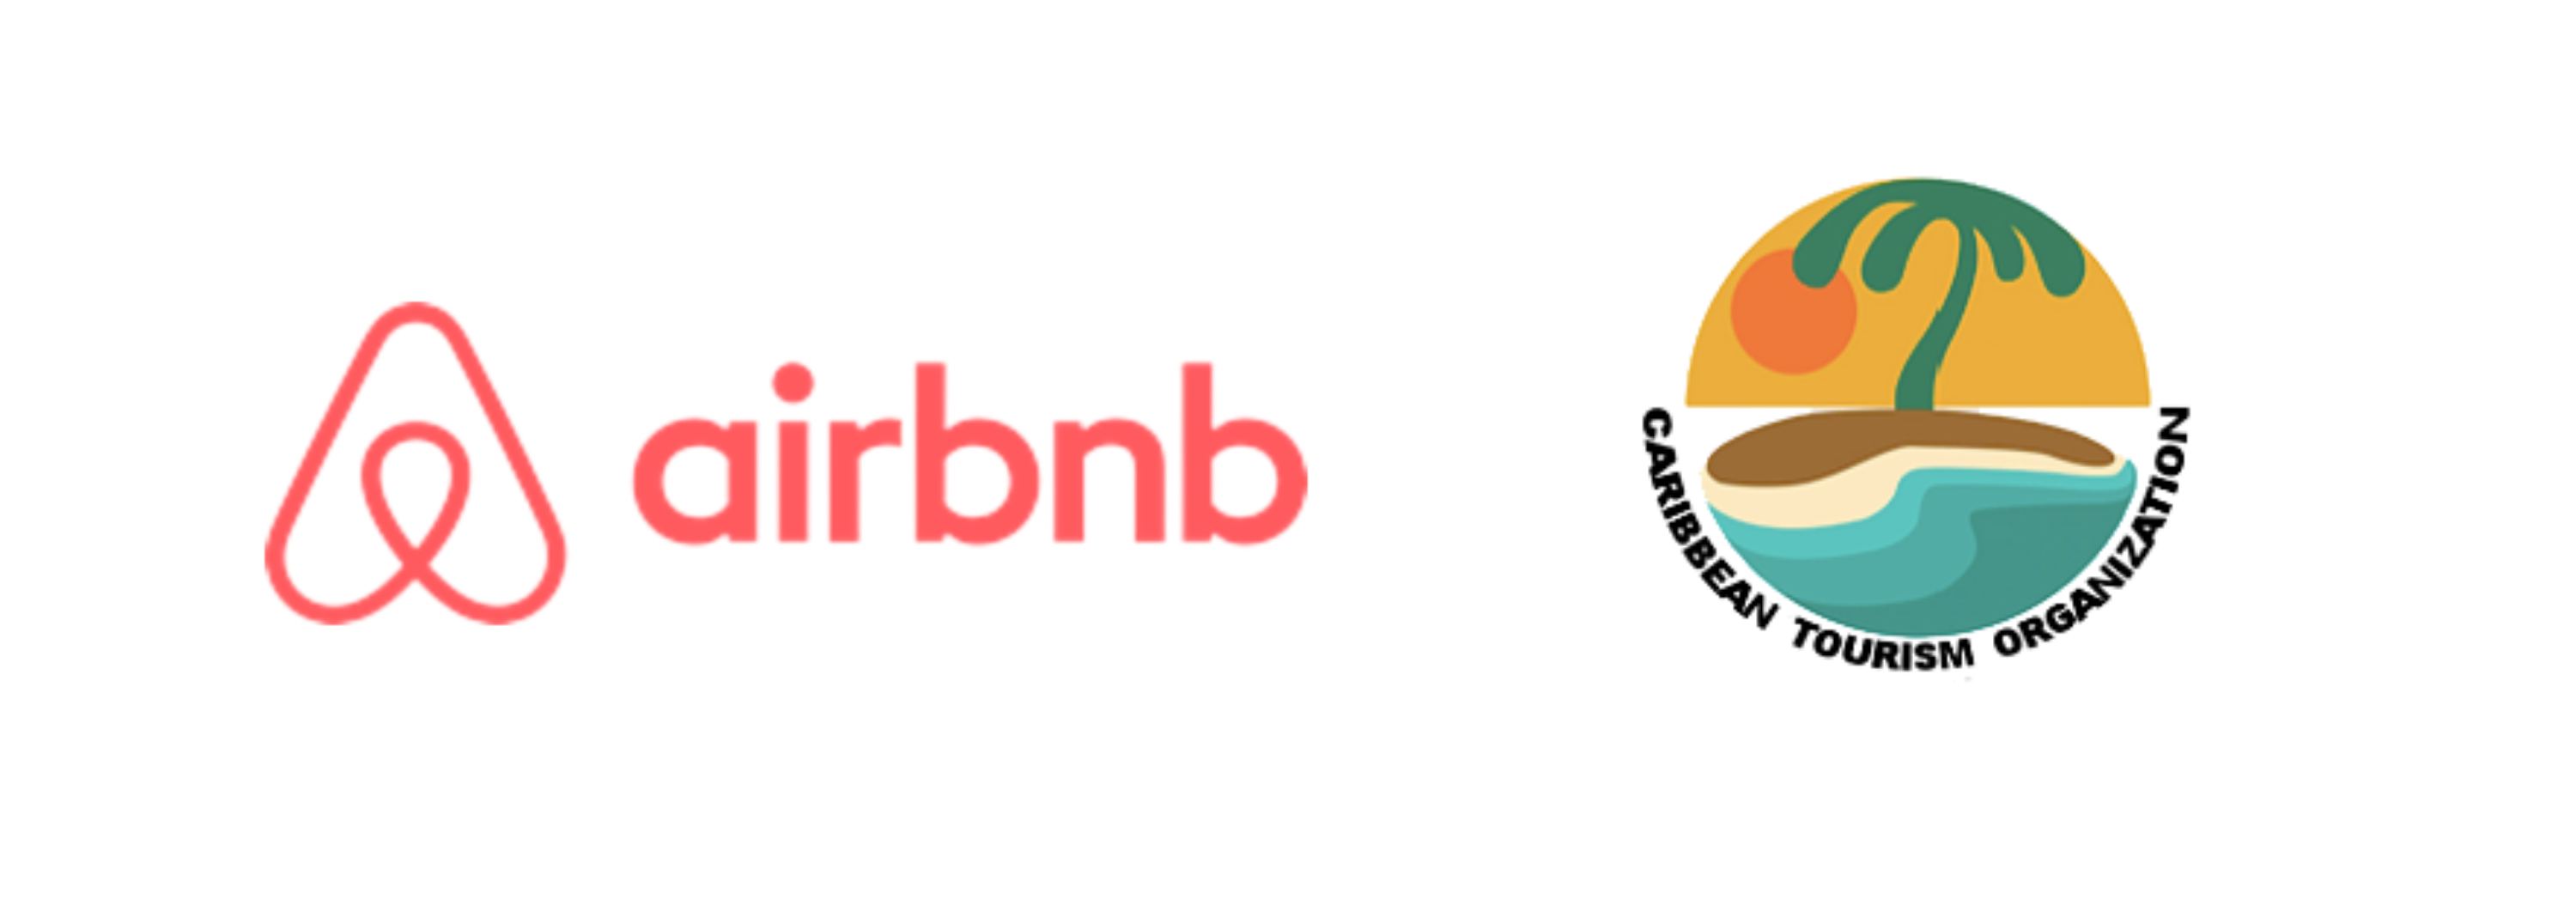 airbnb and tourism